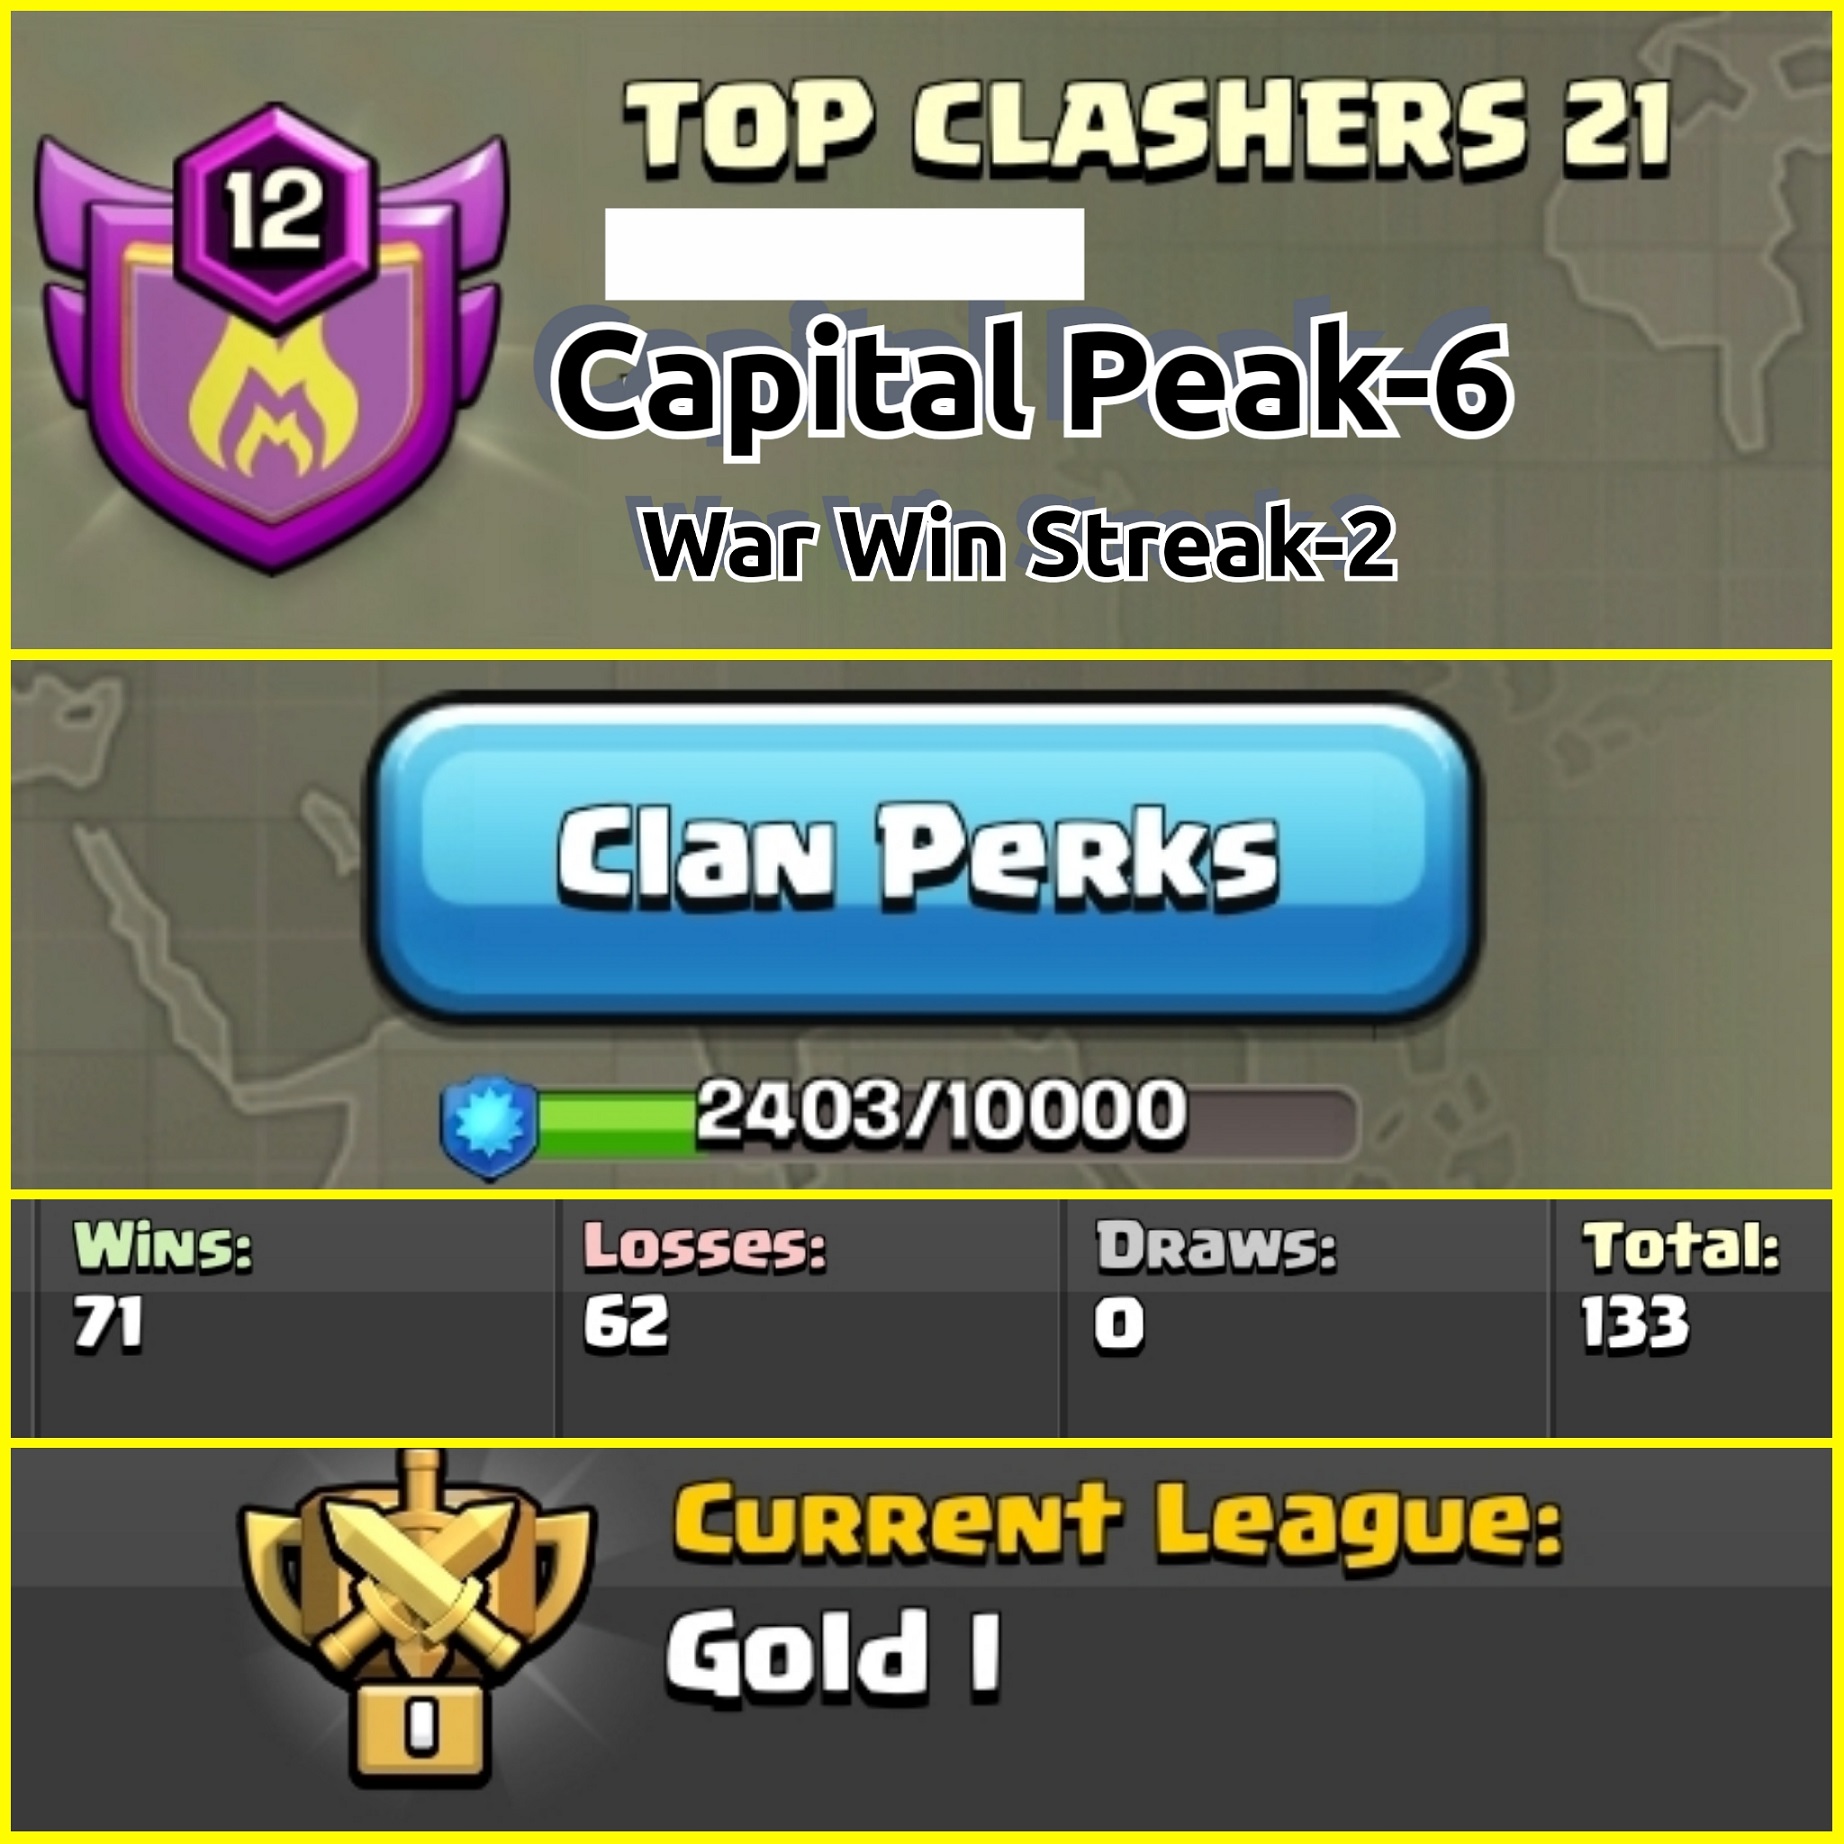 || Level - 12 || Name - TOP CLASHERS 21 || Gold League 1 || Capital Peak 6 || Both Android and iOS || Fast Delivery ||